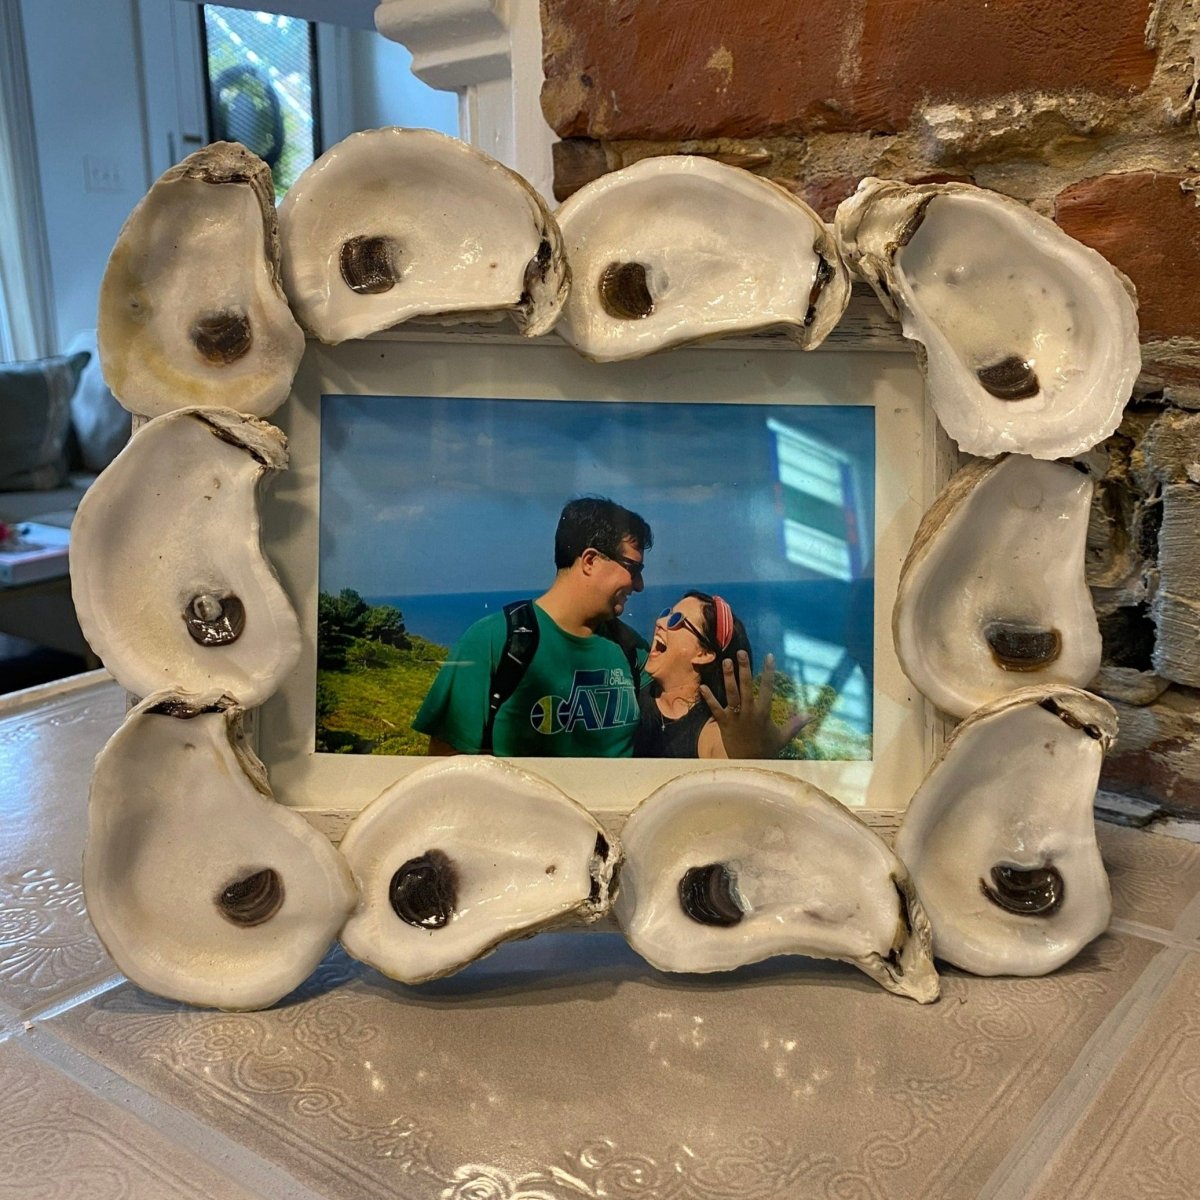 Natural Oyster Shell Picture Frame 5x7 - YaySoiree